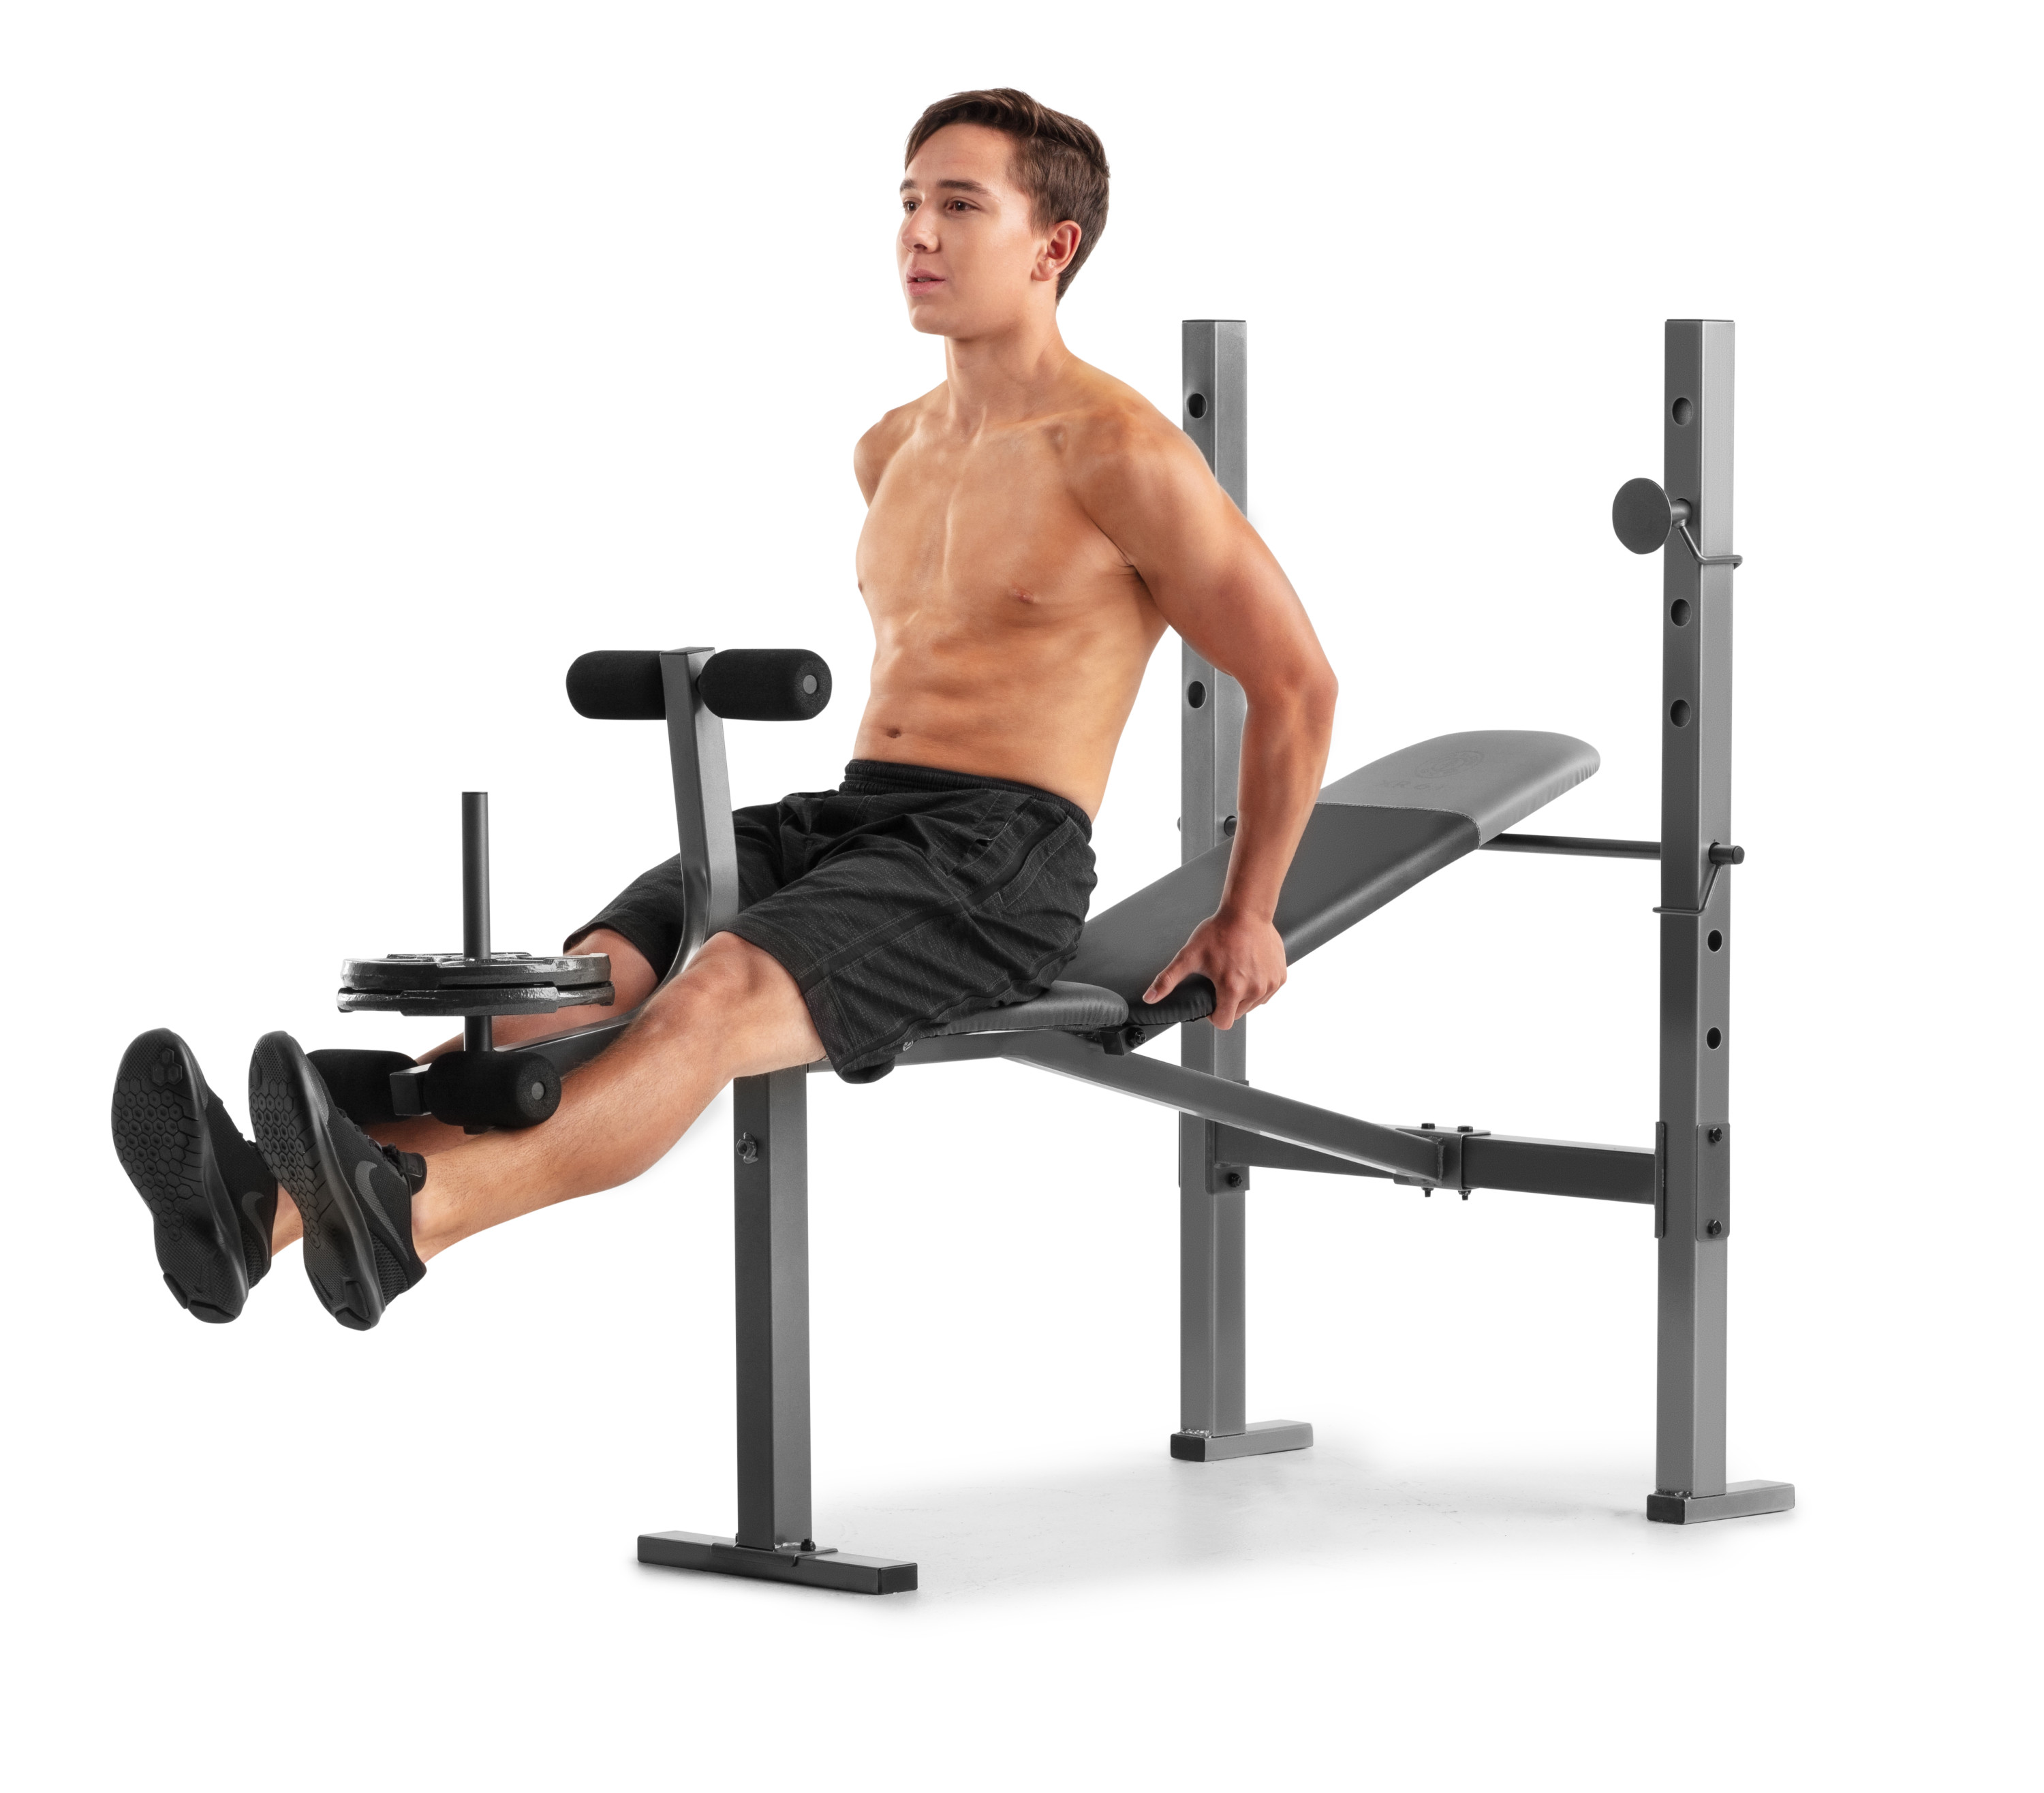 Weider XR 6.1 Adjustable Weight Bench with Leg Developer, 410 lb. Weight Limit - image 9 of 12